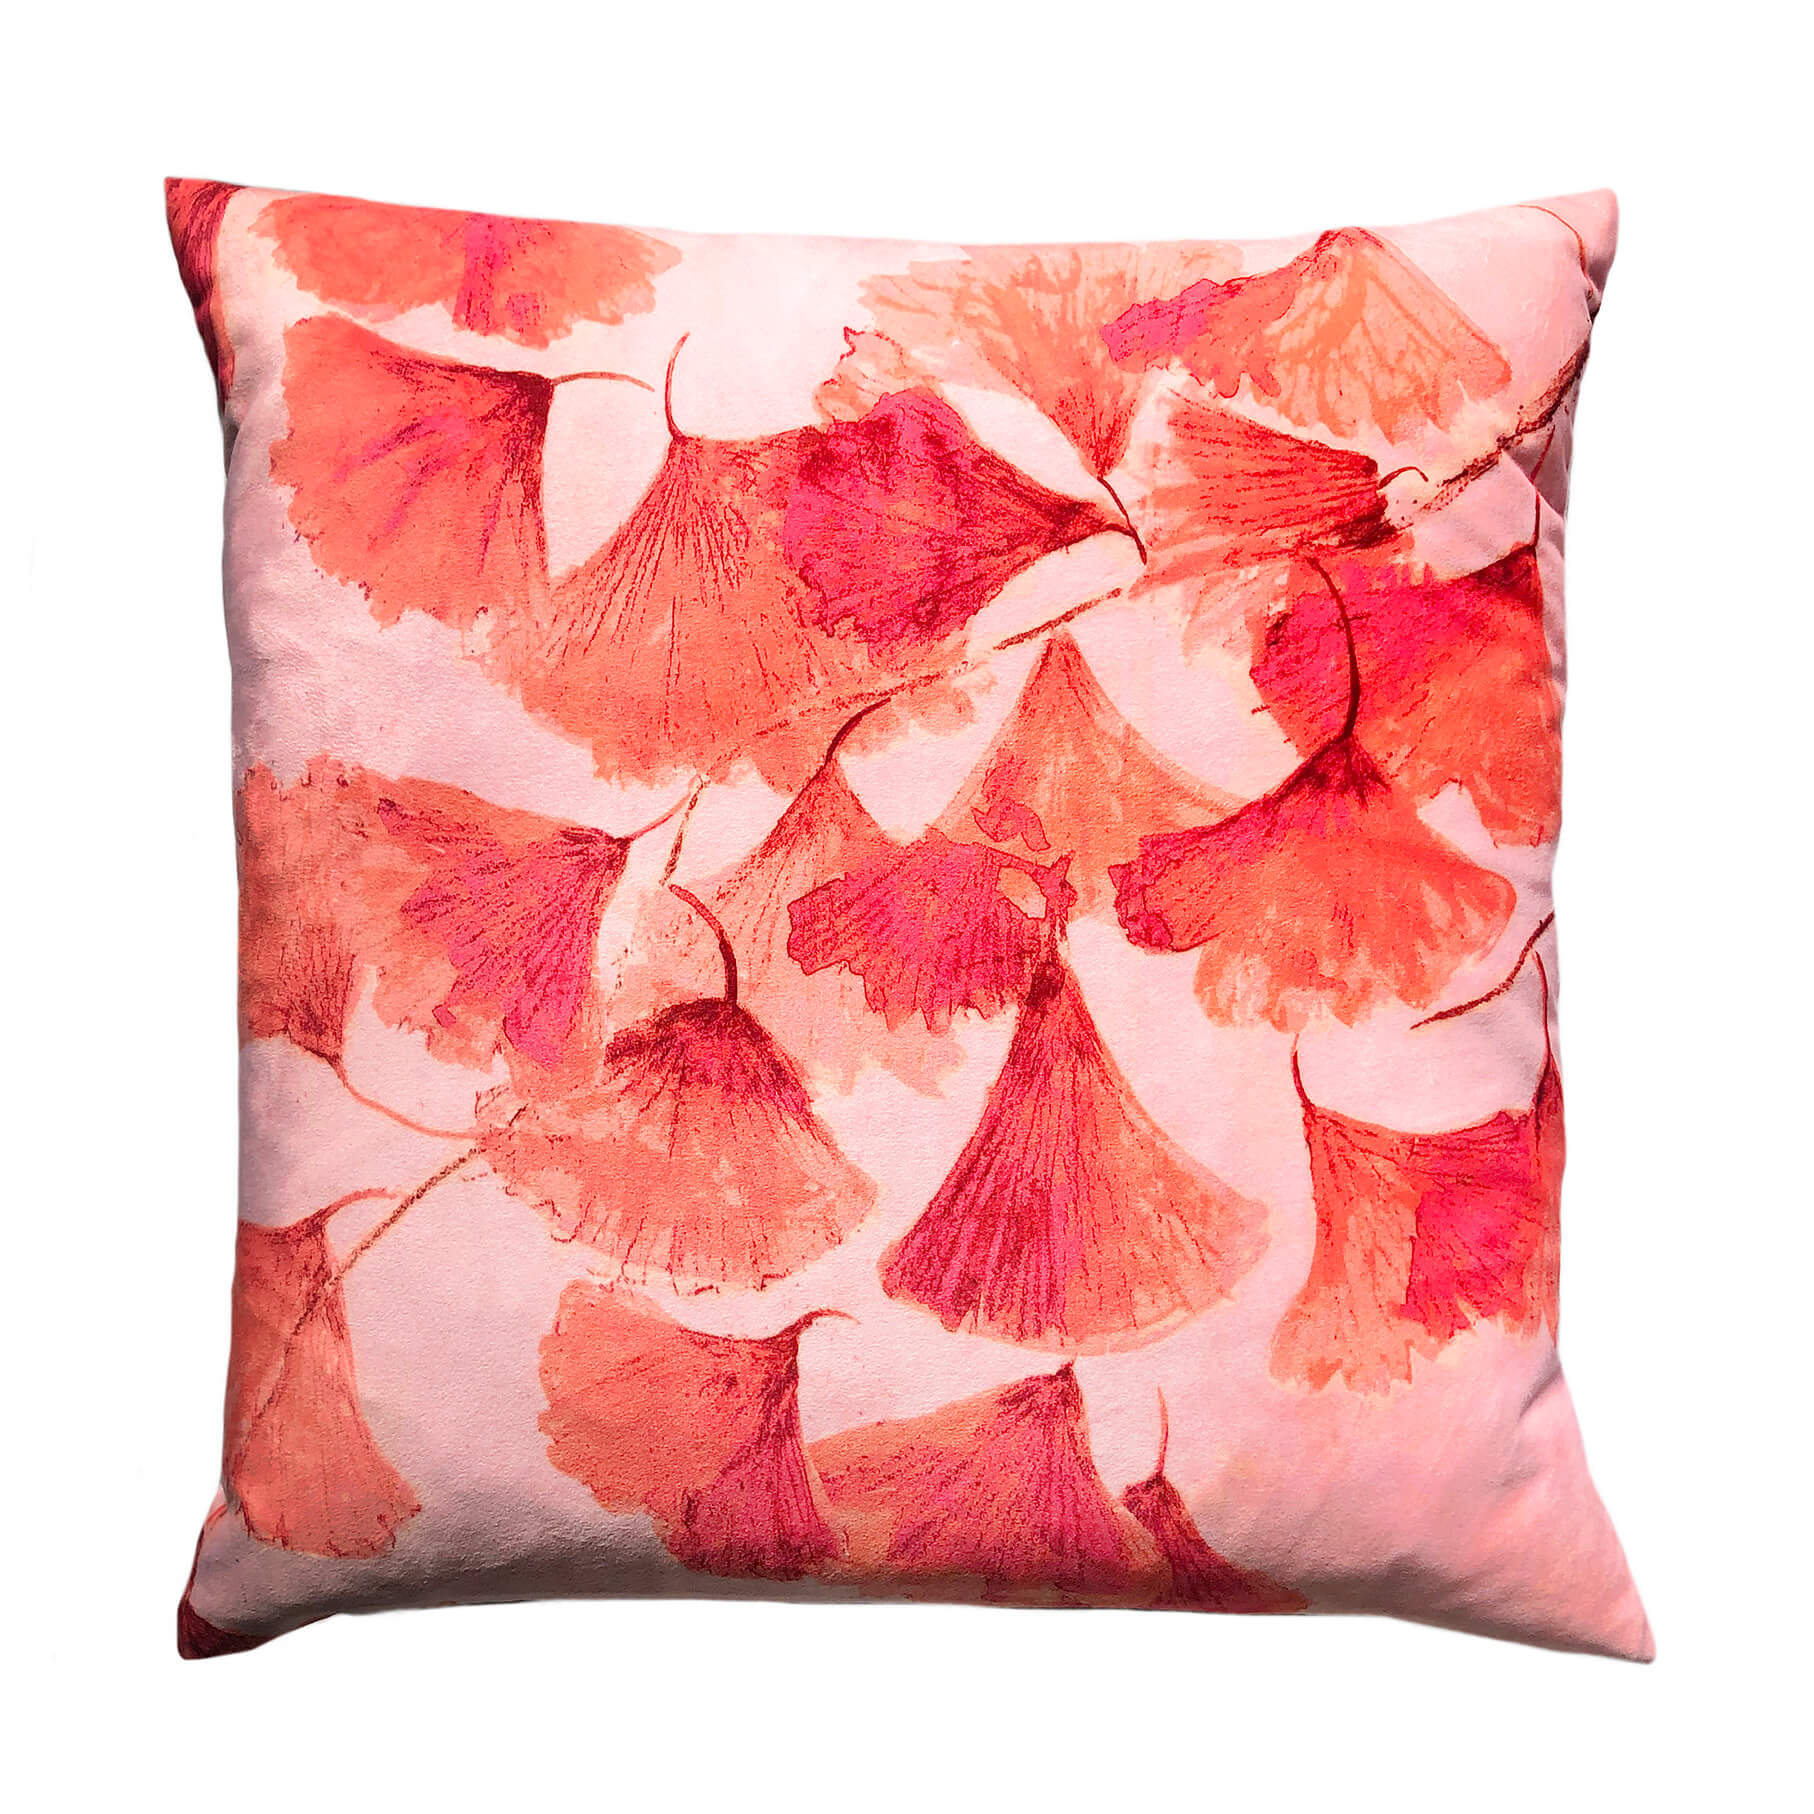 Velvet cushion - Coral ginkgo by Anna Jacobs